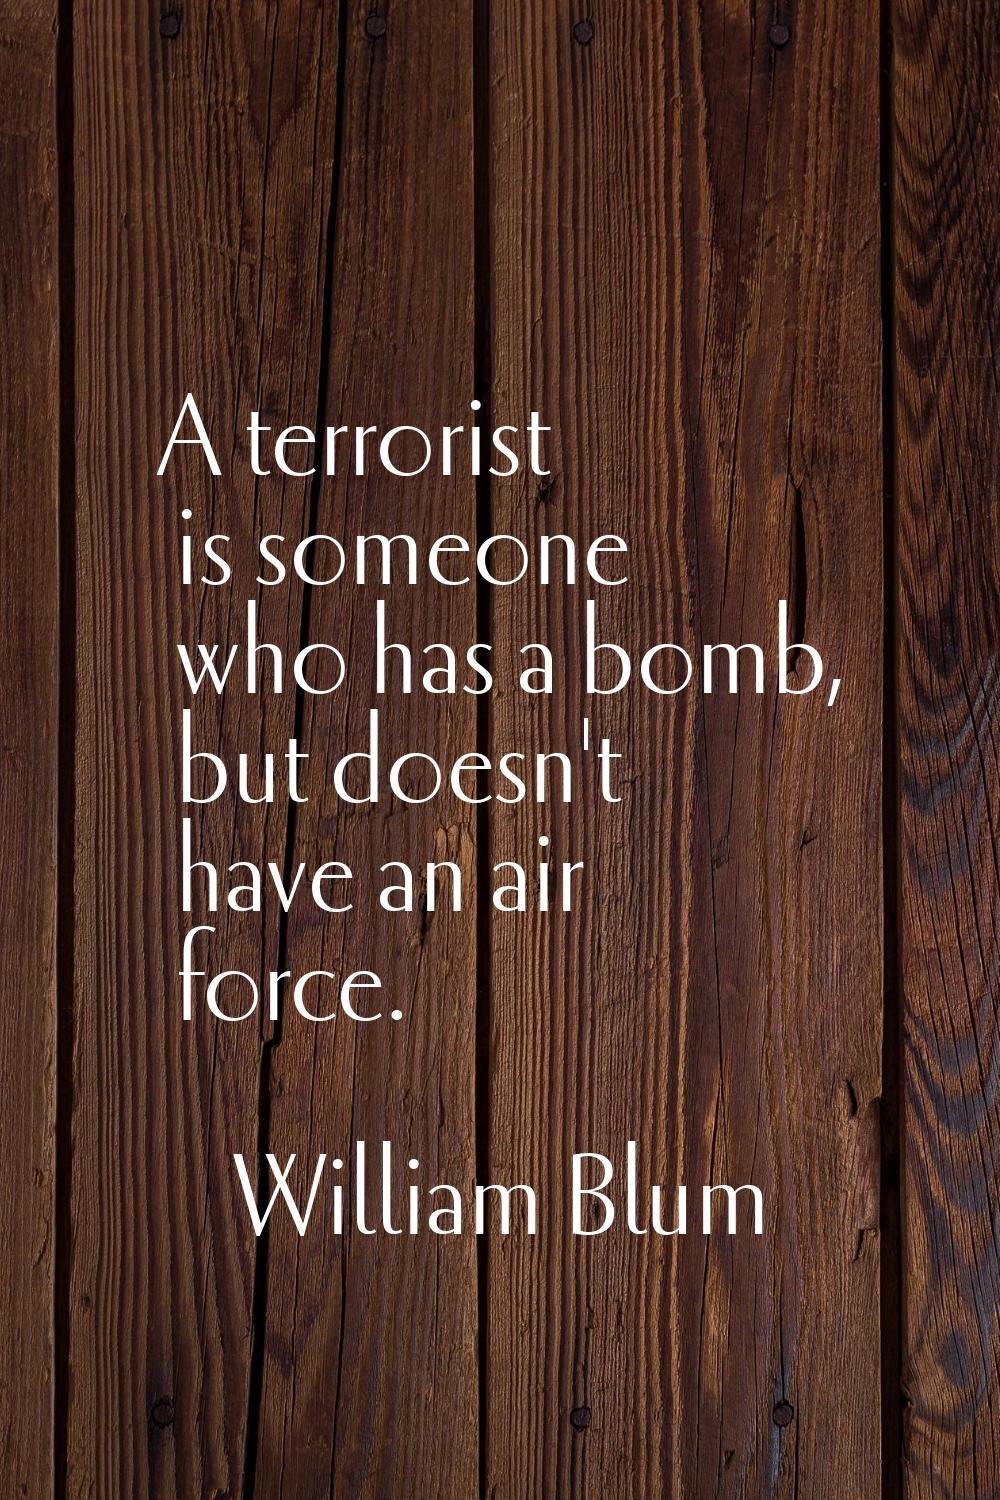 A terrorist is someone who has a bomb, but doesn't have an air force.